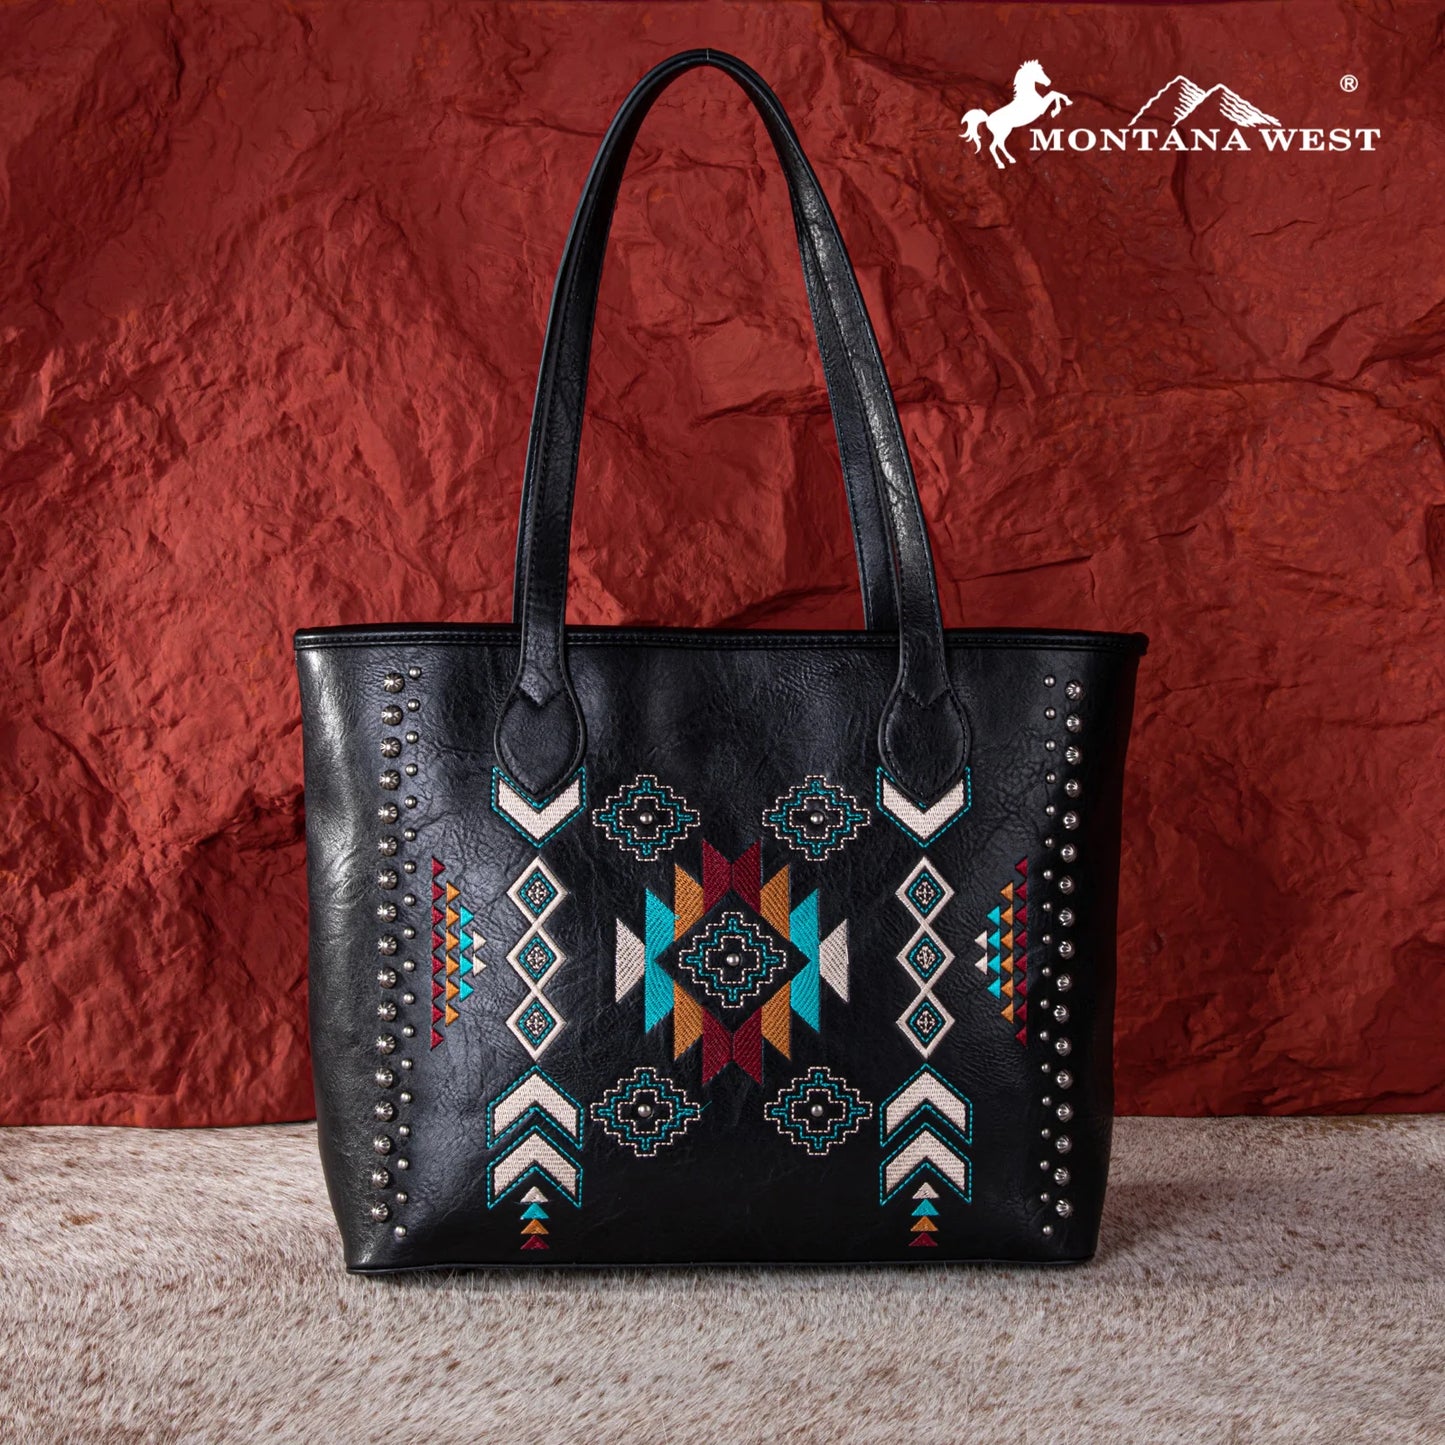 Montana West Embroidered Collection Tote - Black